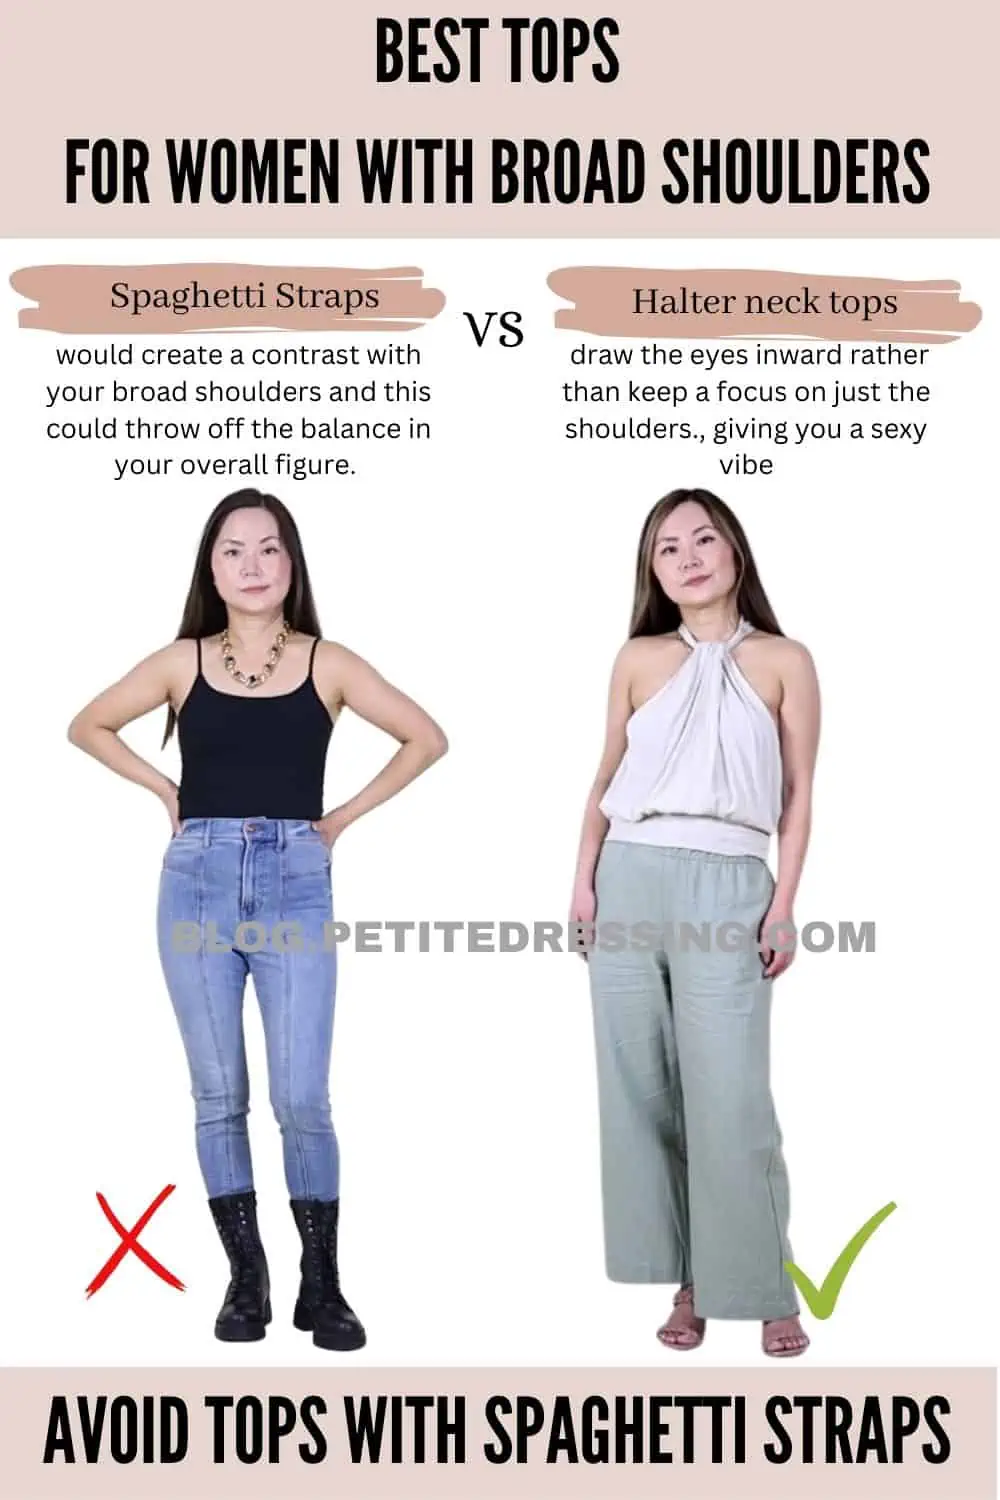 Tips for broad shoulders: avoid off-the-shoulder tops, shoulder pads, and  puffy sleeves. Opt for V-neck or scoop neck tops instead. 👚�